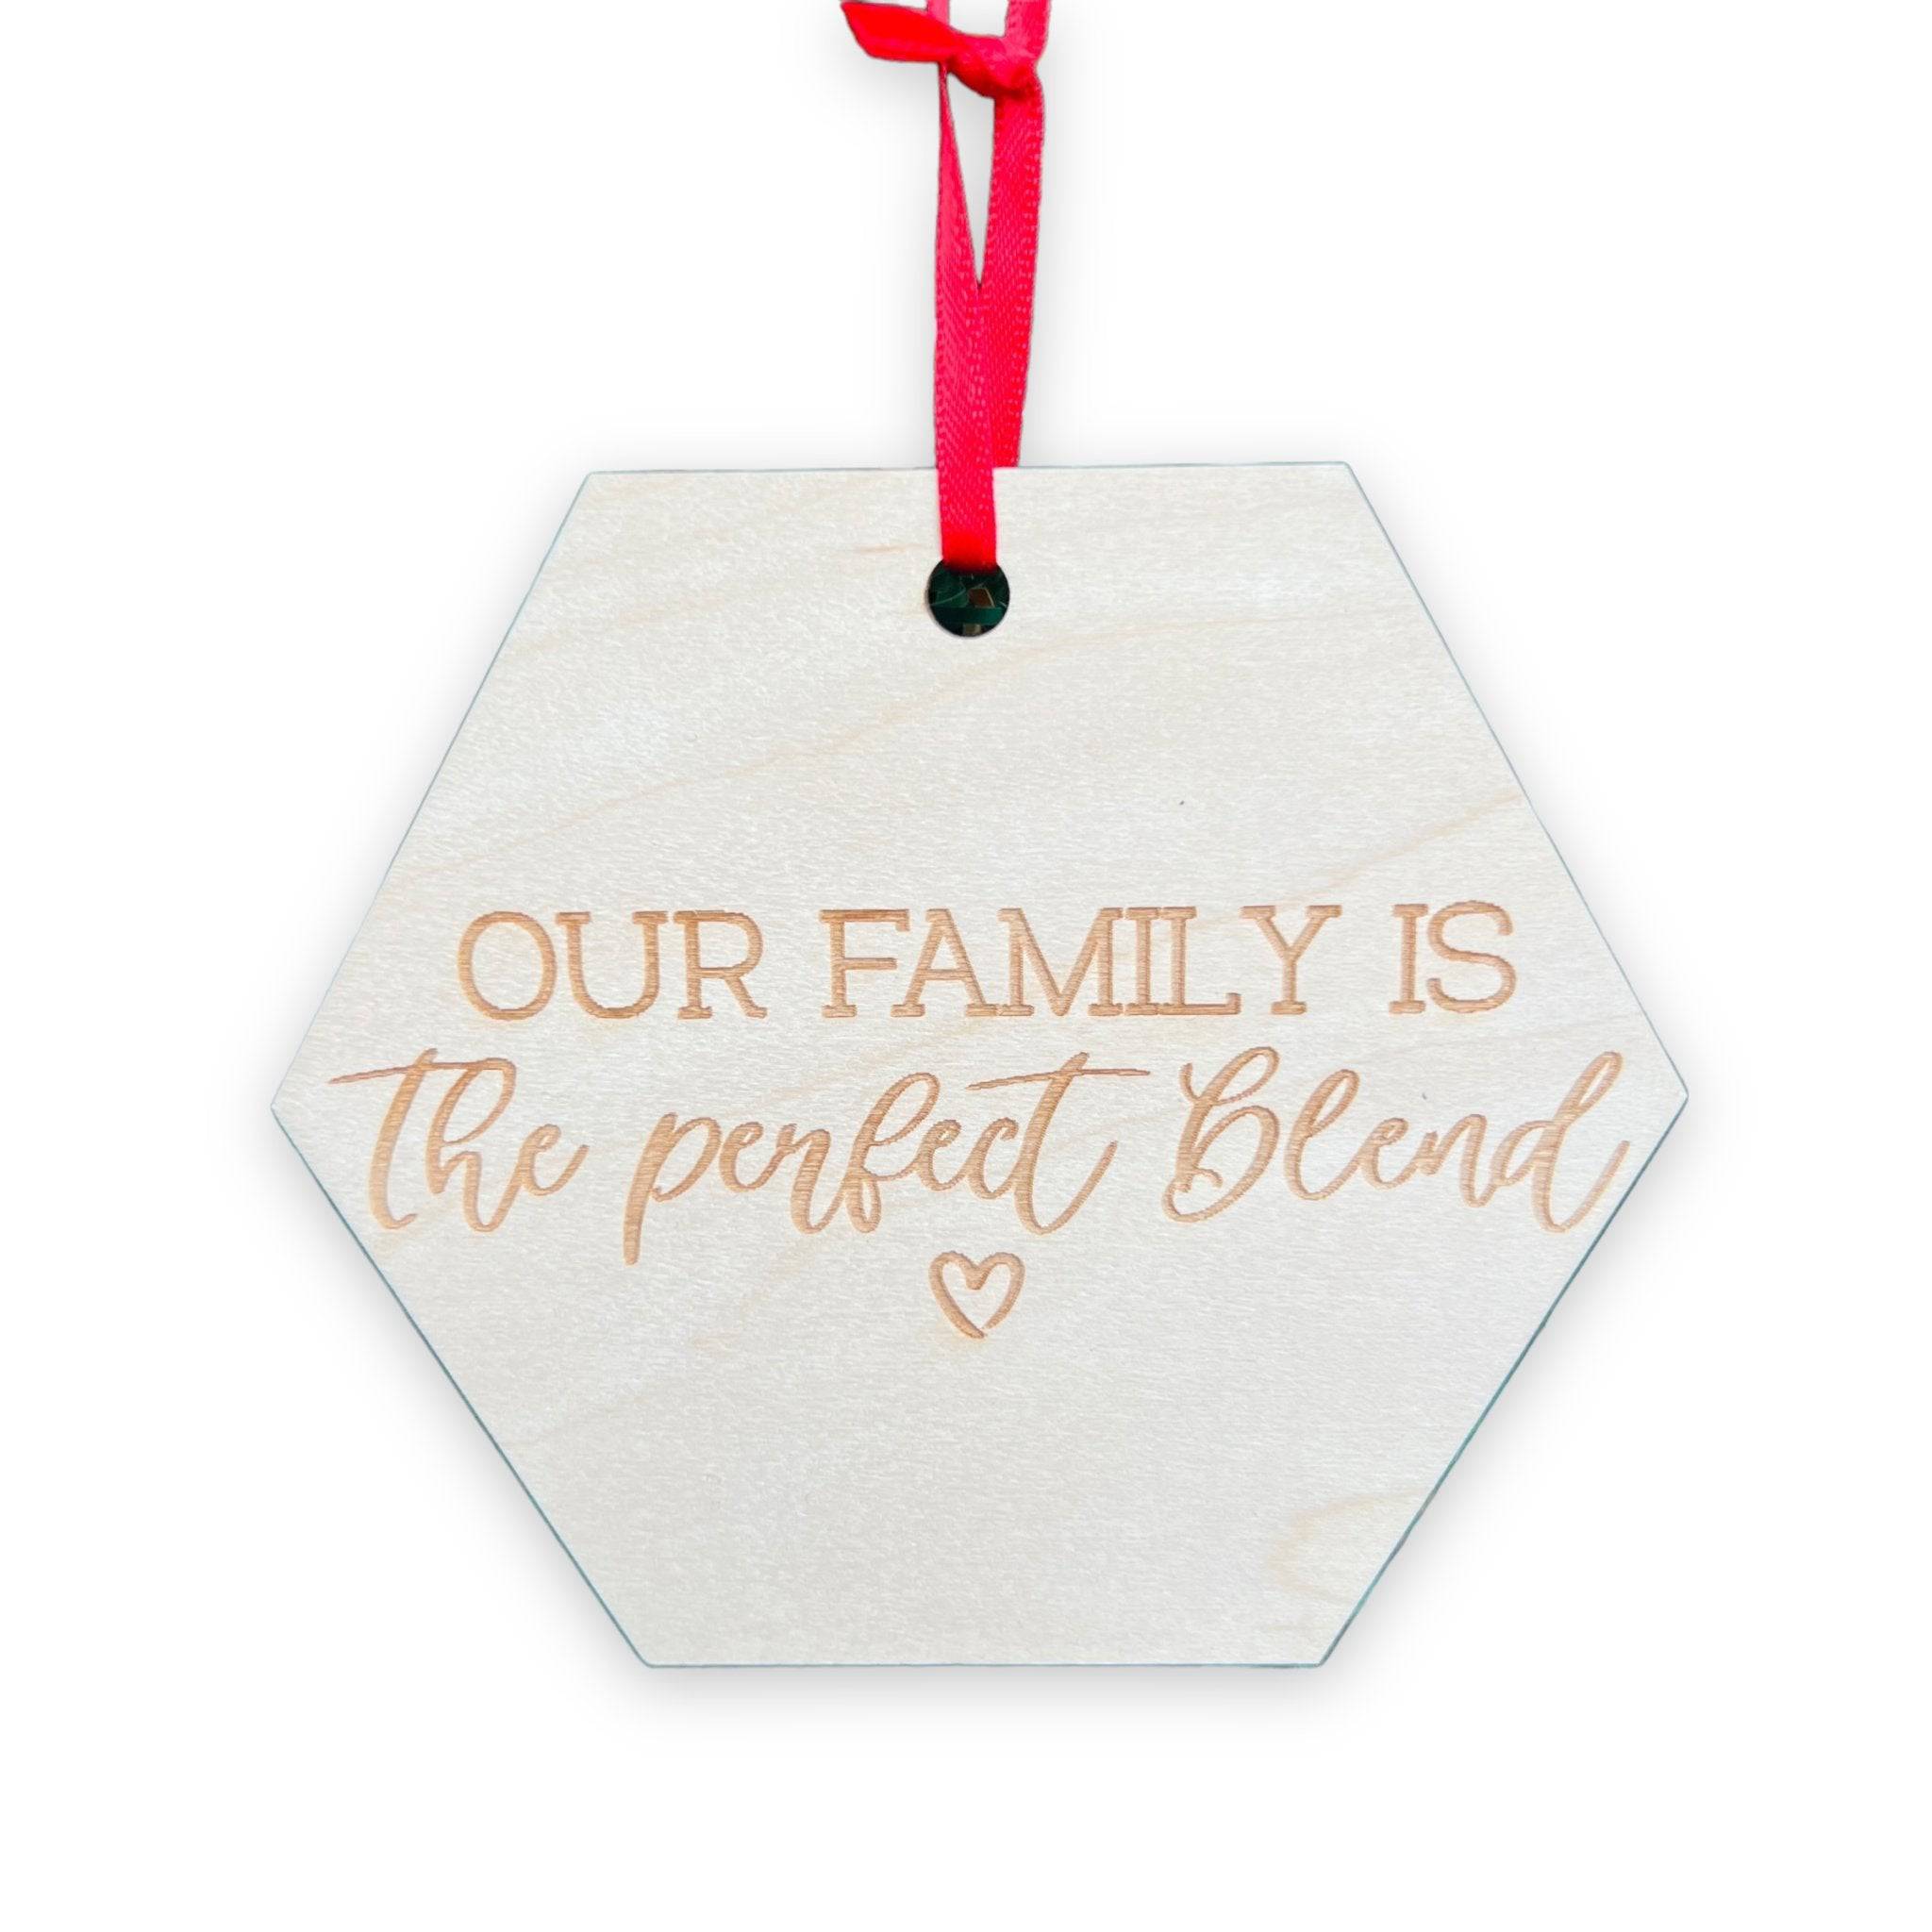 Our Family is The Perfect Blend Ornament - Sticks & Doodles